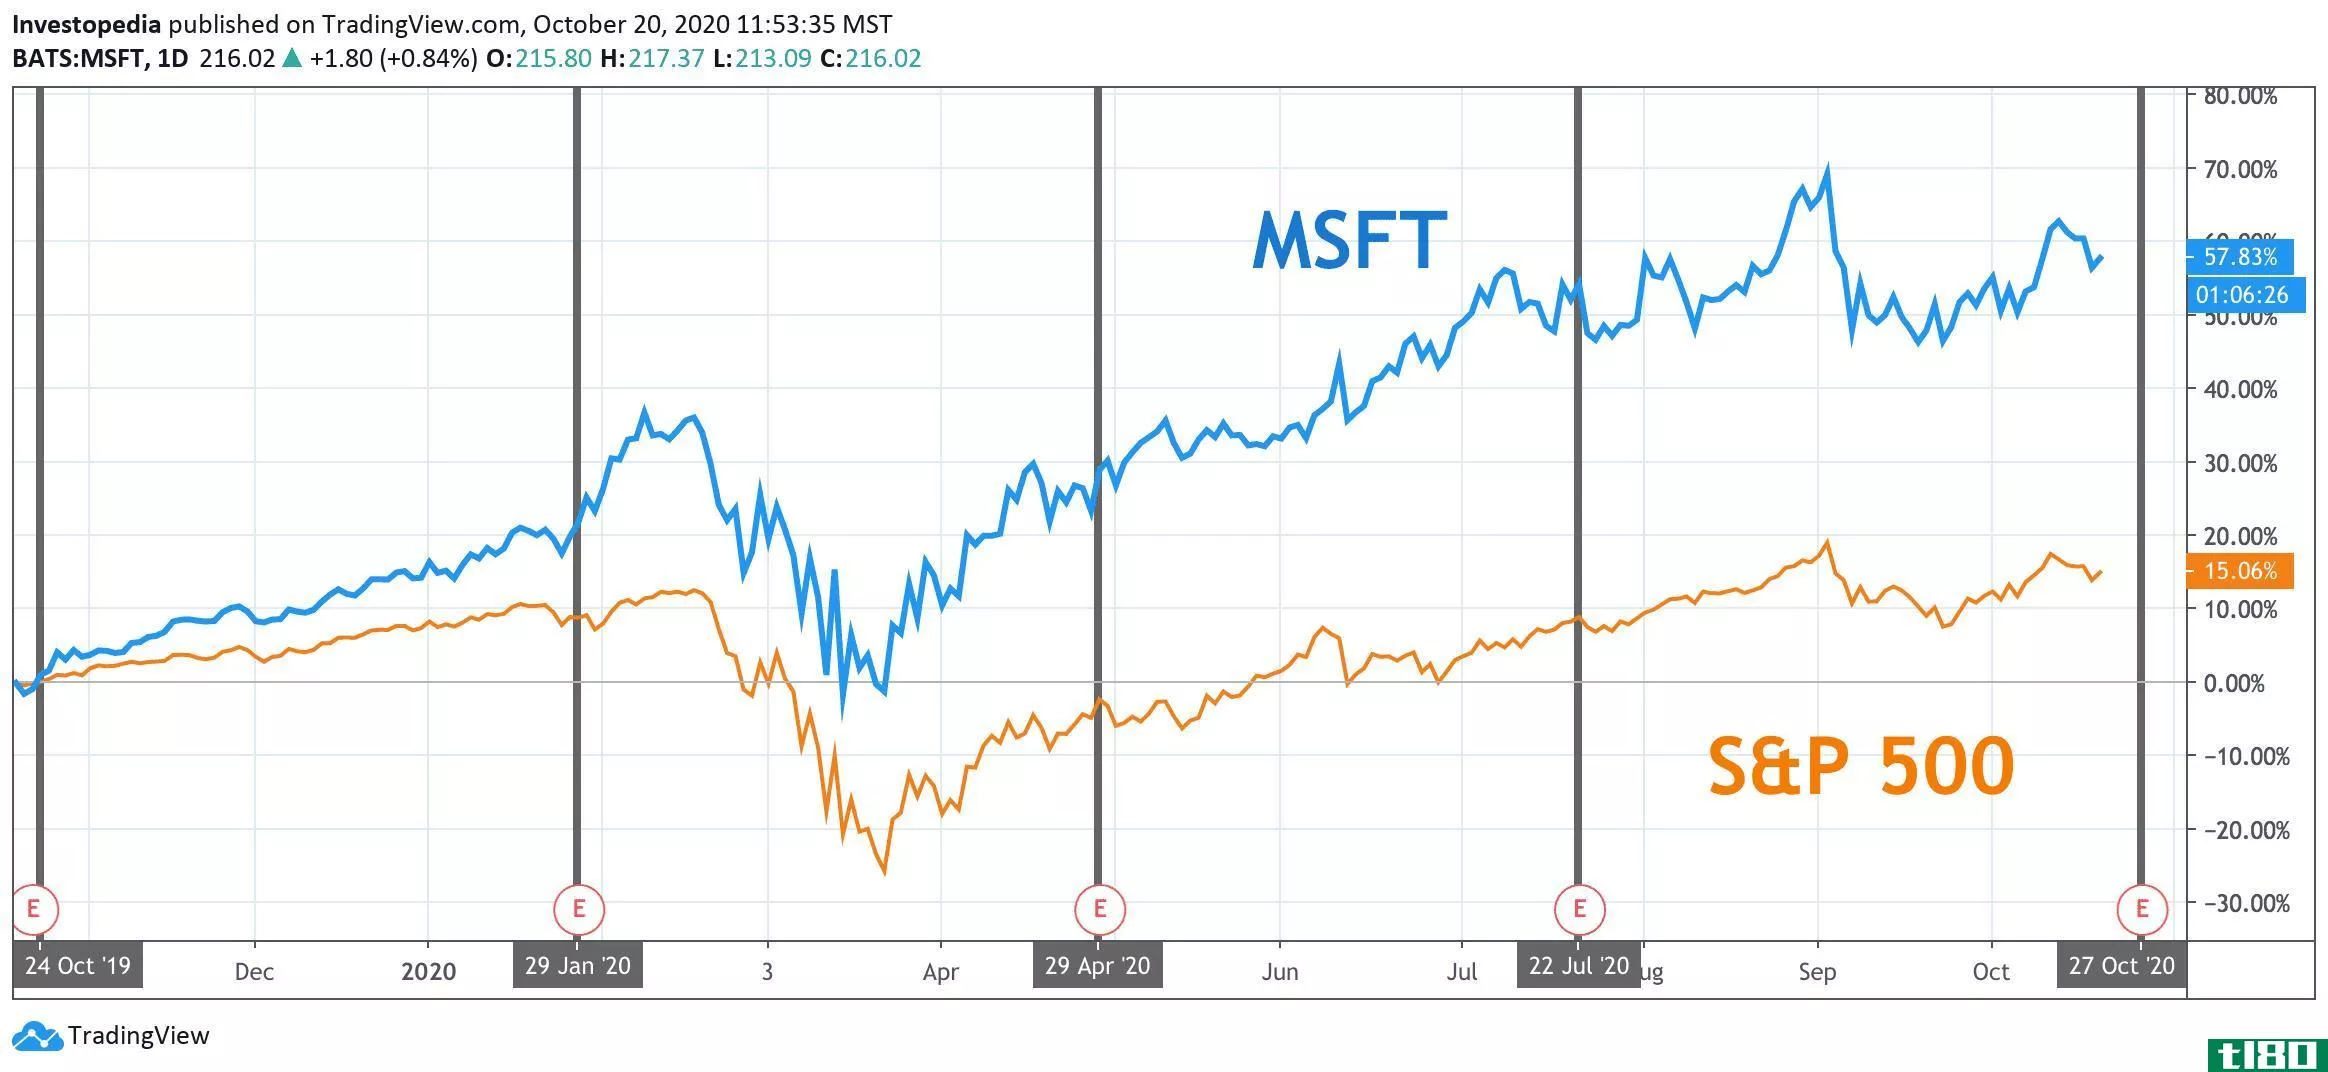 One Year Total Return for S&P 500 and Microsoft